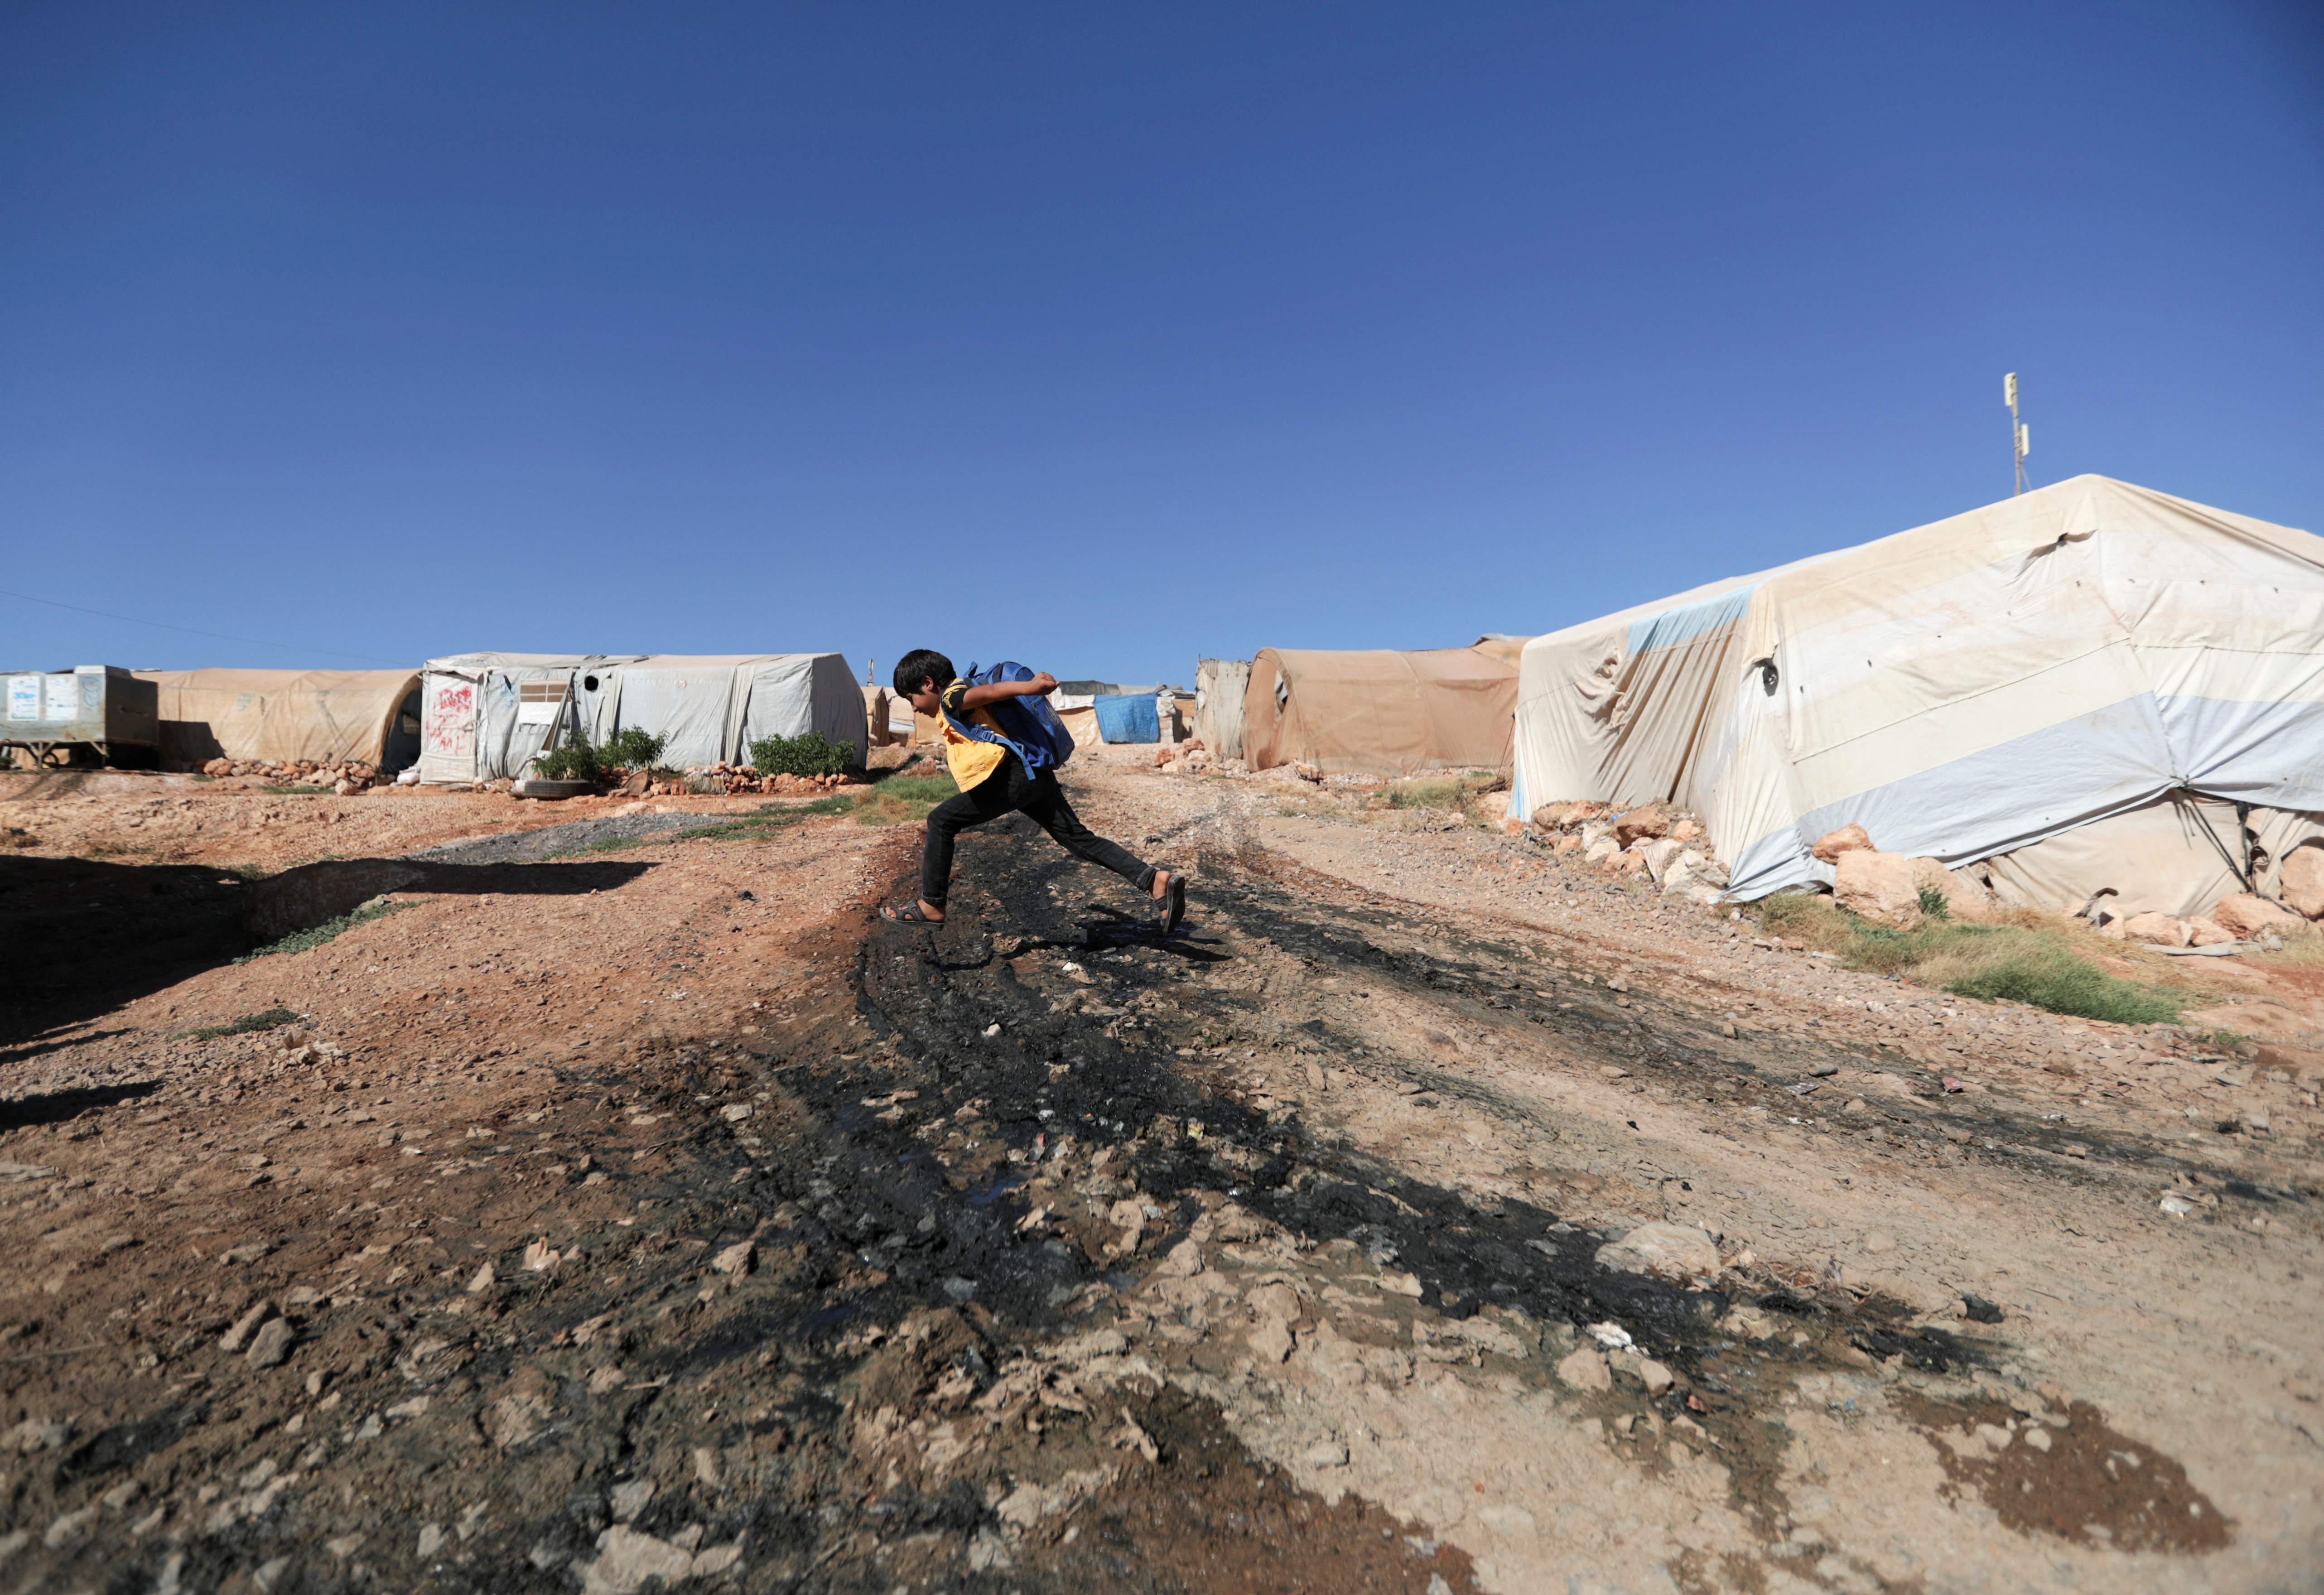 A boy jumps over sewage at a camp for internally displaced Syrians, in northern rebel-held Idlib